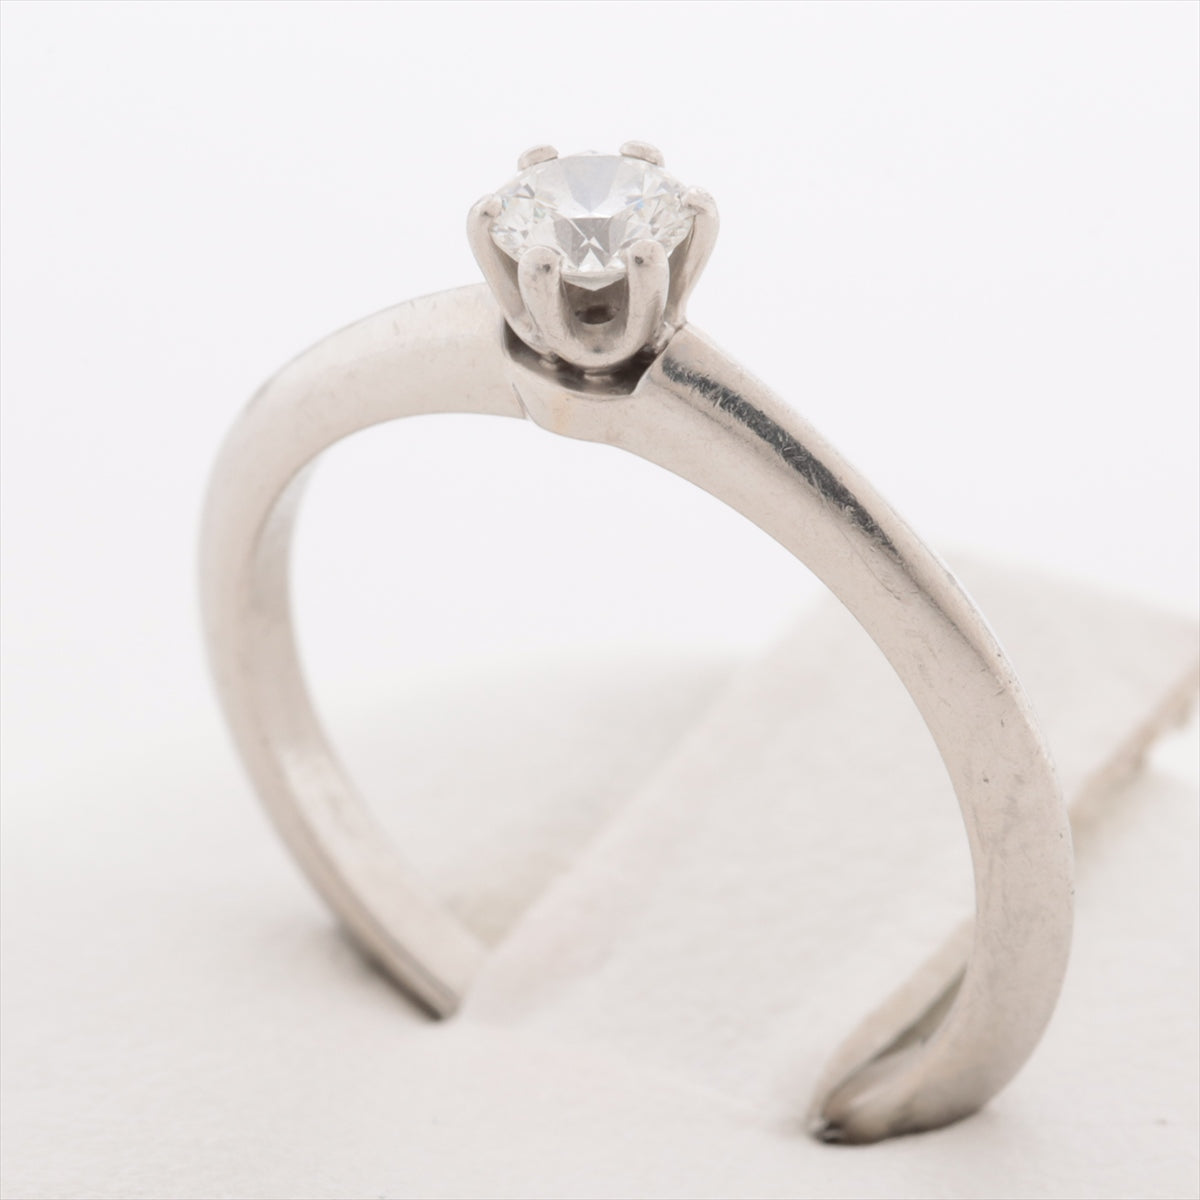 Tiffany Solitaire diamond rings Pt950 3.3g 0.21 Engraving blur Bullion scratches